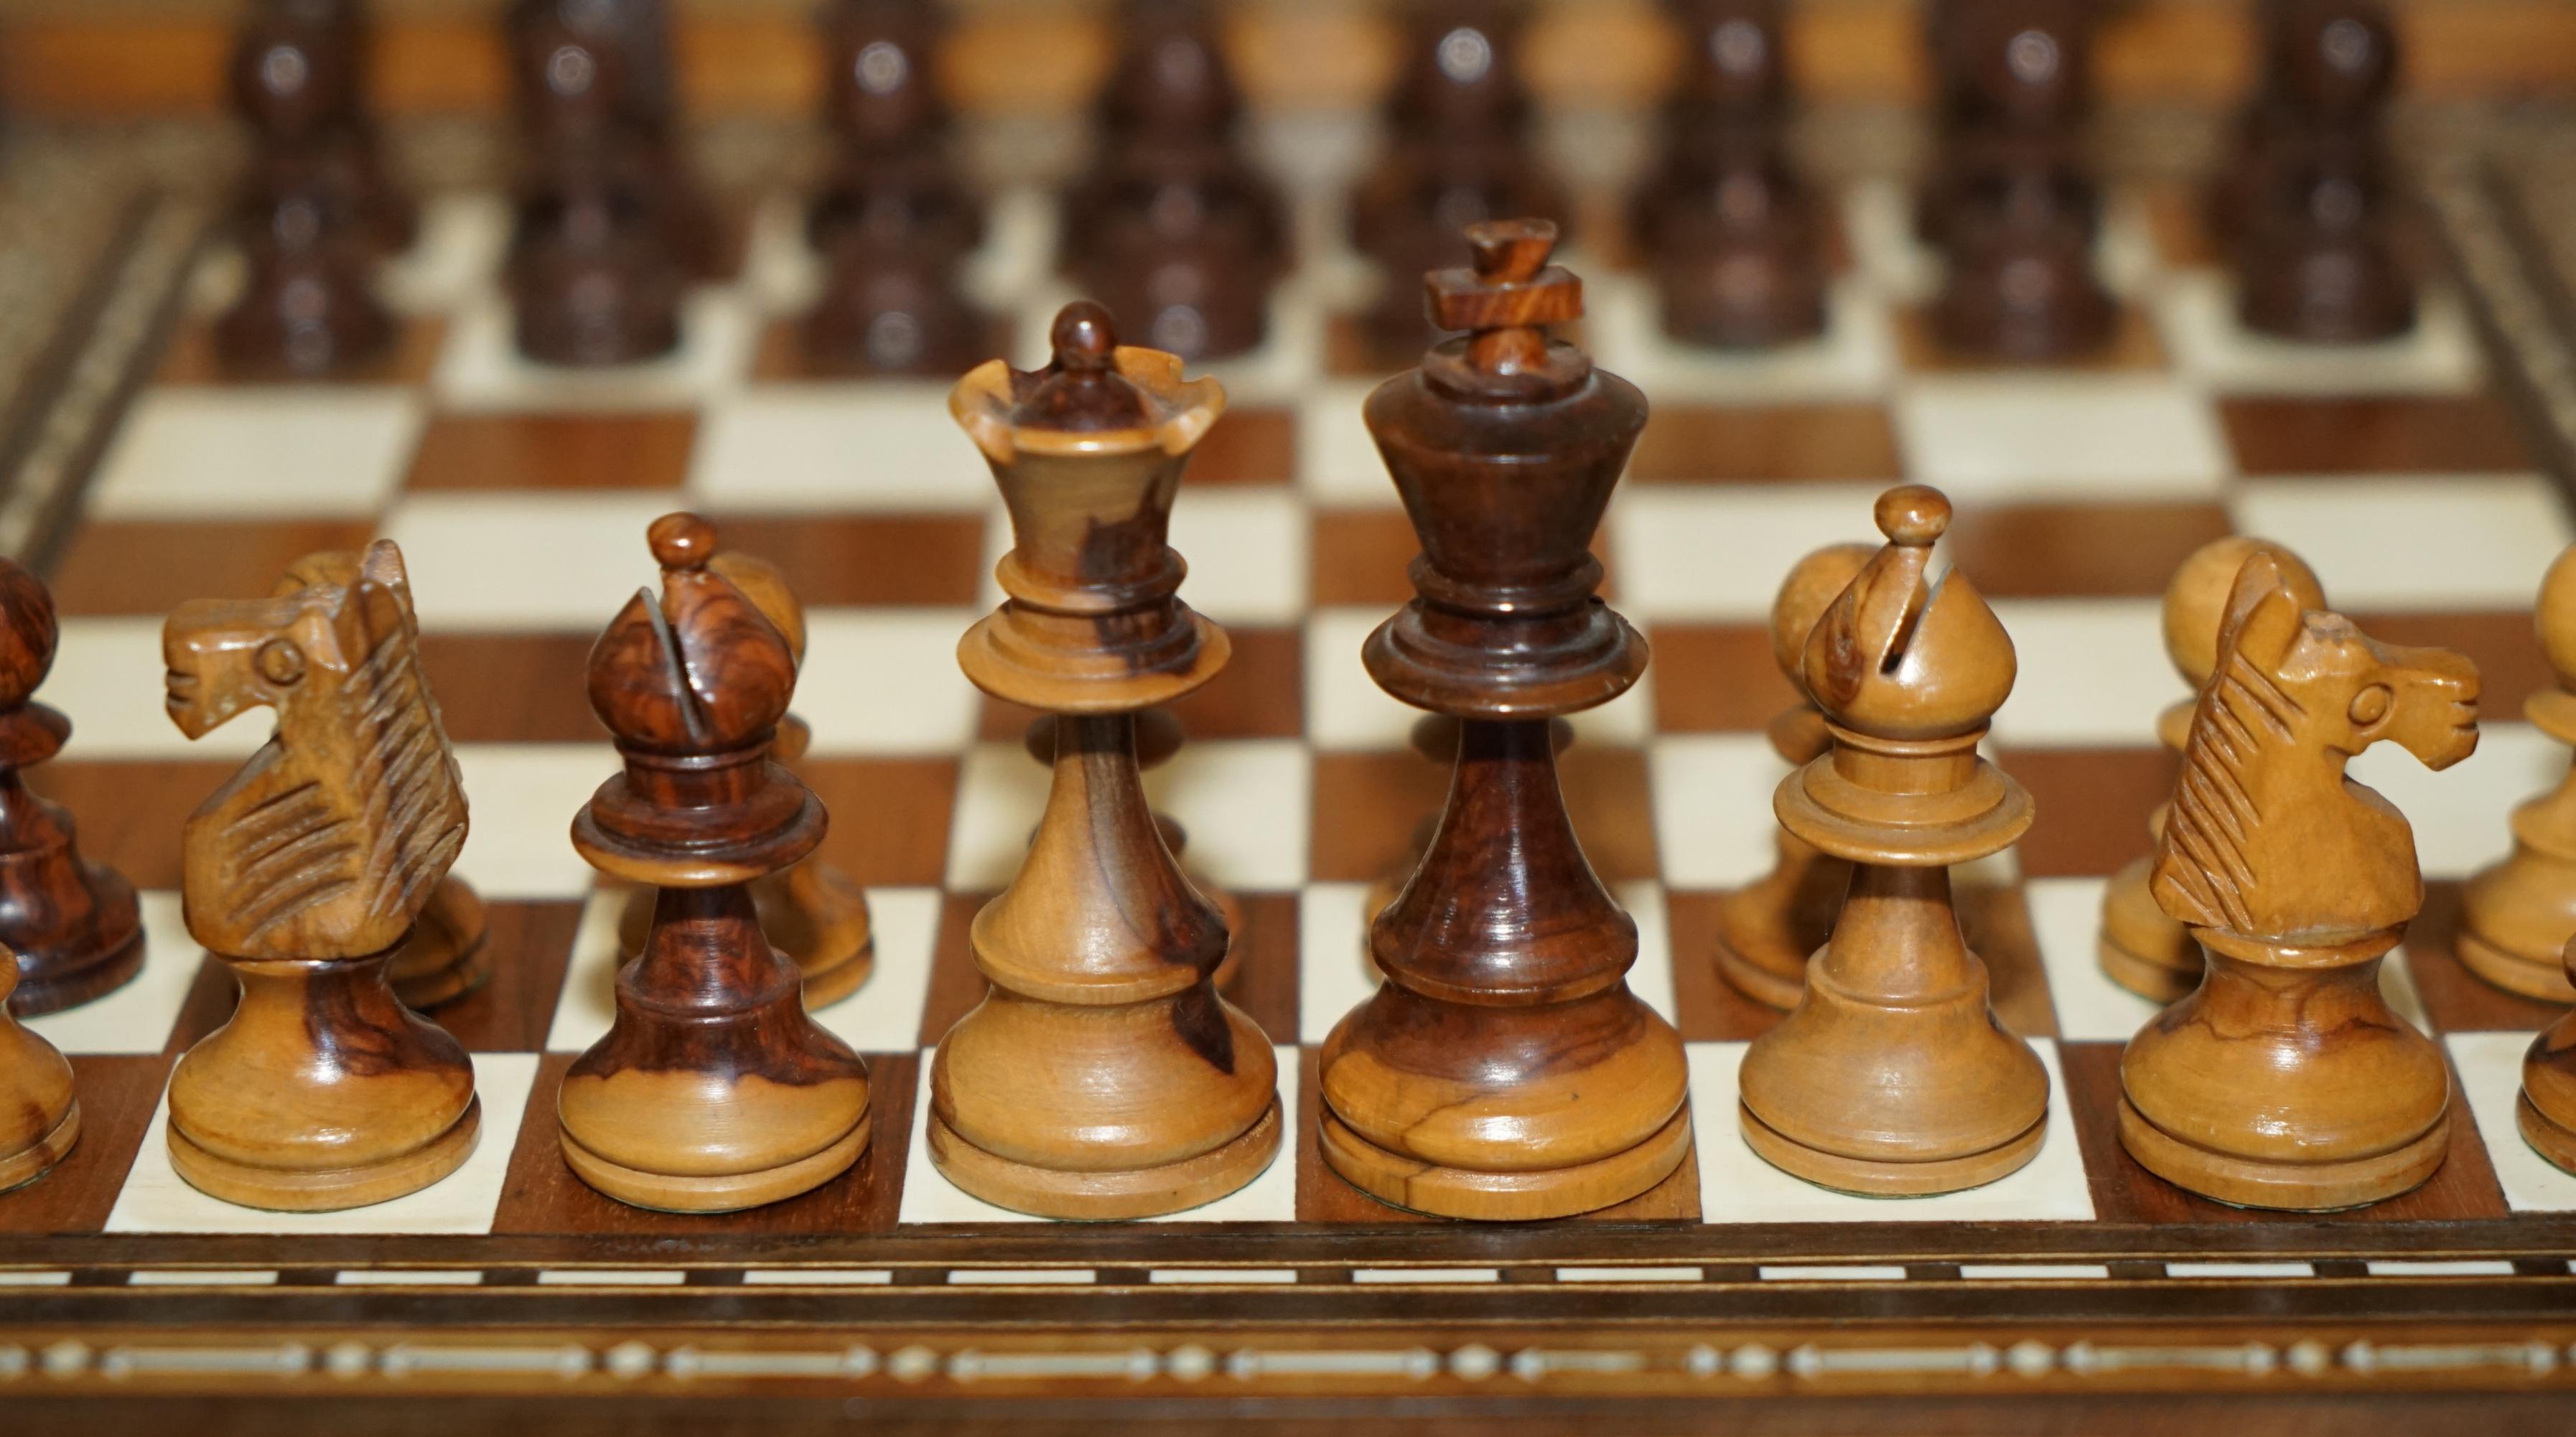 Hardwood ANTIQUE CIRCA 1900 ANGLO INDIAN INLAID CHESSBOARD AND PIECES STUNNiNG TIMBER For Sale